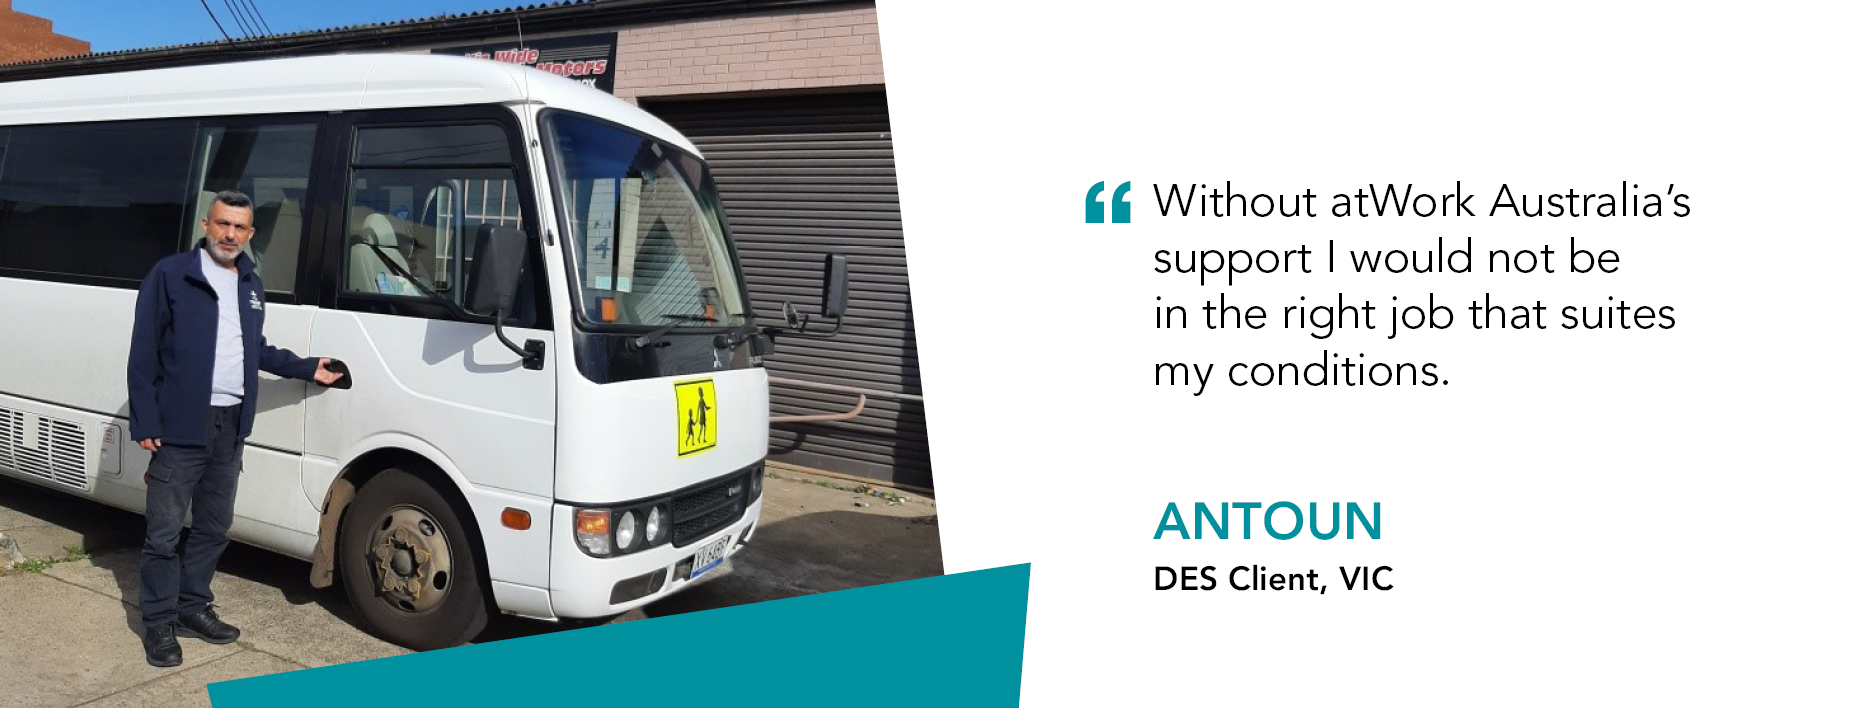 Client Antoun stands next to a bus. Quote reads "Without atWork Australia's support I would nt be in the right job that suites my conditions." said Antoun, DES Client Victoria